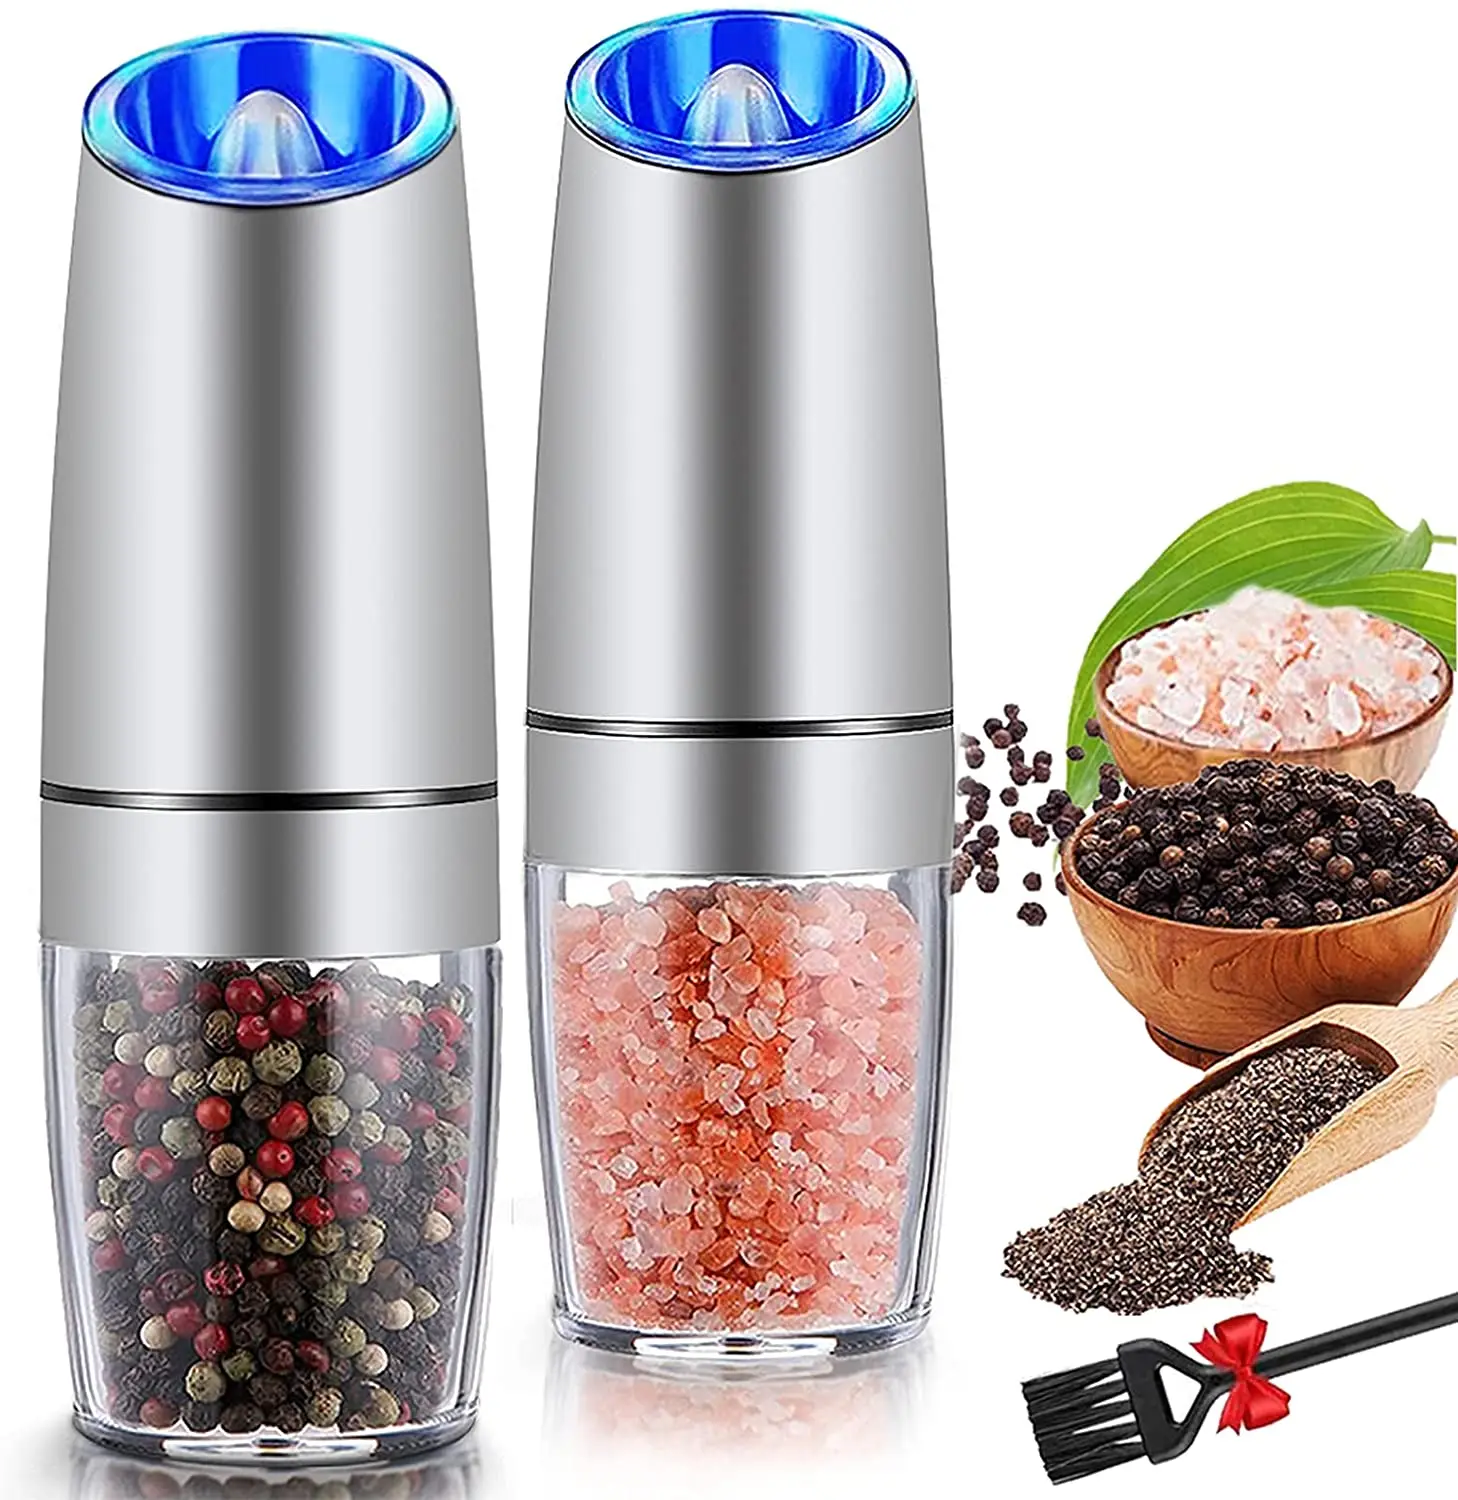 https://ae01.alicdn.com/kf/H74c32d129355410aa61fd33cc7ff9ea9e/Electric-Salt-and-Pepper-Grinder-Set-USB-Rechargeable-Electric-Pepper-Mill-Shakers-Automatic-Spice-Steel-Machine.jpg